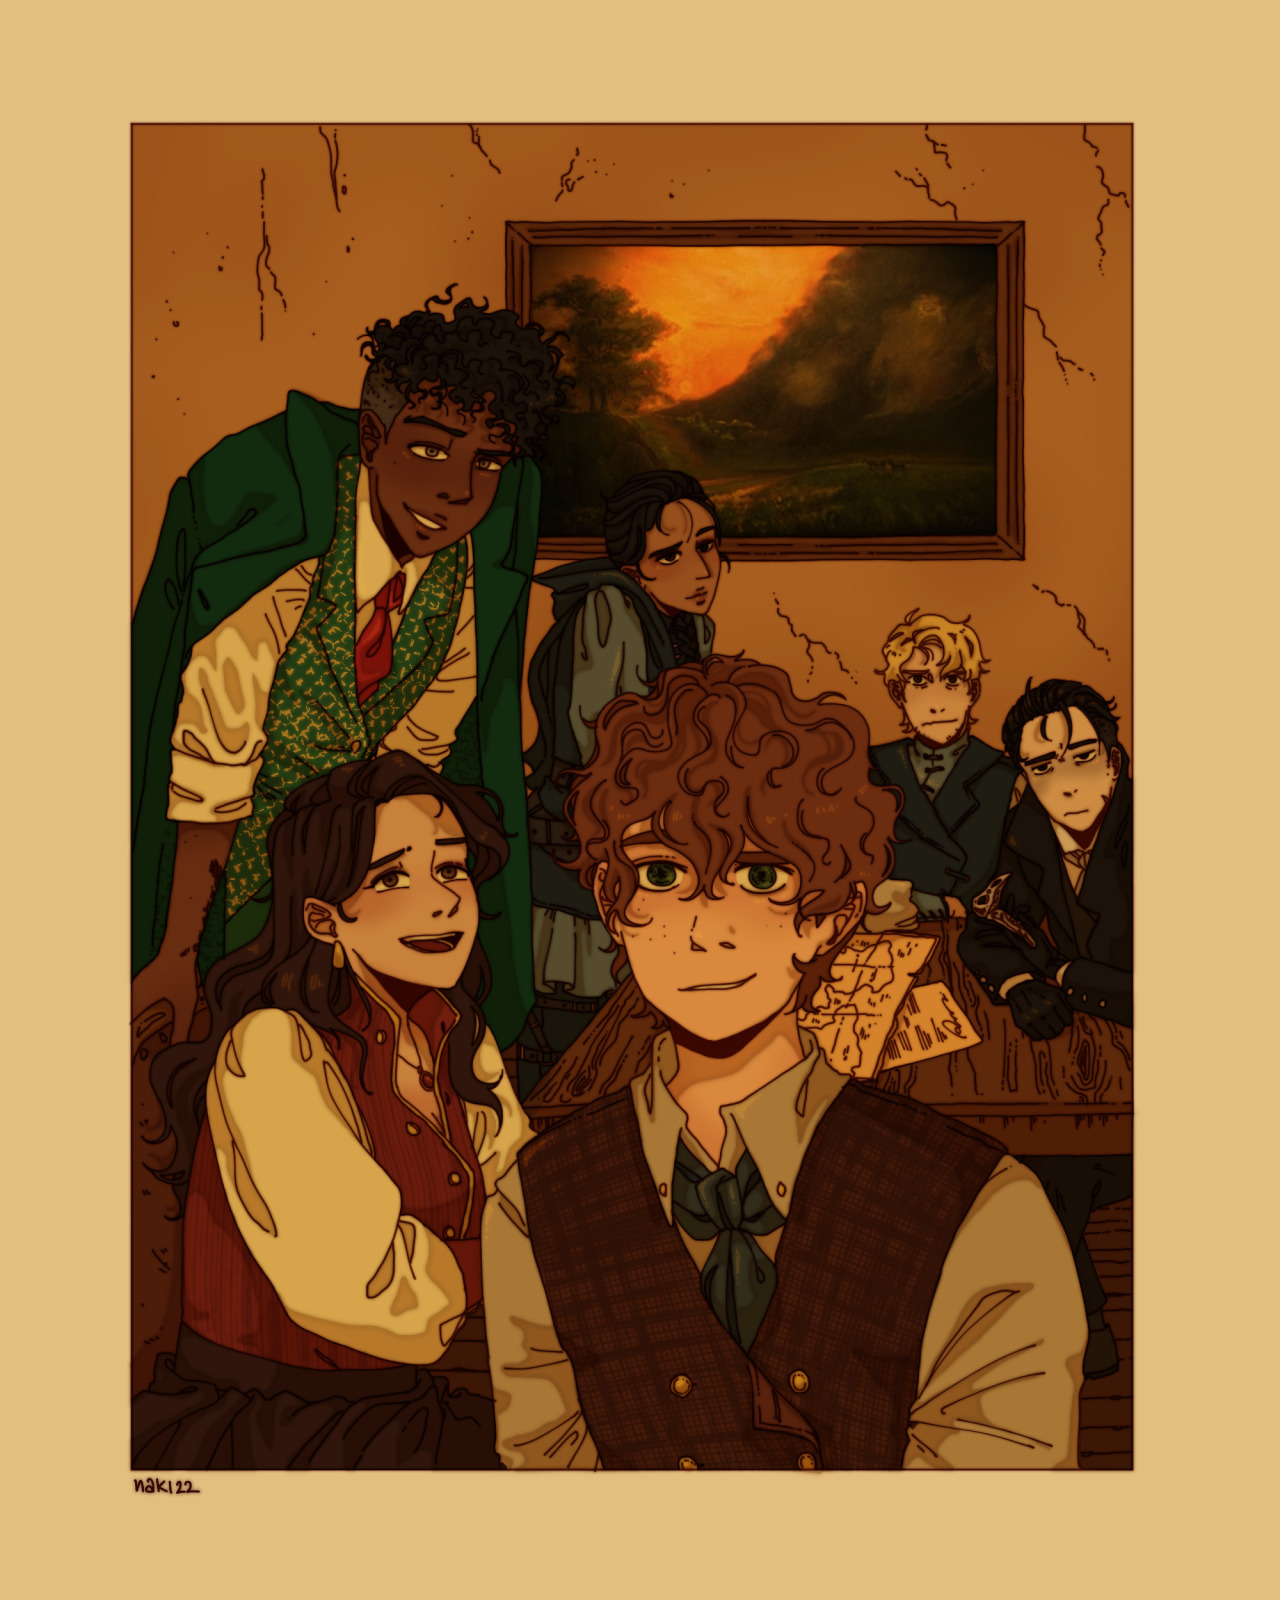 REMEMBER EARLY THIS YEAR i think WHEN THE CROWS GOT TOGETHER AND GAVE US THIS PHOTO? anyway #six of crows #soc#grishaverse#crooked kingdom#leigh bargudo#wylan #wylan van sunshine  #wylan van eck #nina zenik#jesper fahey#jesper #jesPER MY SON  #i will leave kaz for last lmao #inej #inej my one true love  #inej mY QUEEN #inej ghafa#matthias helvar #or is it #mathias helvar#idek#AND NOW#MY SON#kaz brekker #KAZ MFUCKING BREKKER #kaz rietveld #the bastard of the barrel  #the KING of ketterdam  #the sulking teenager in the corner  #i am sleep deprived and can only think of all the bad names i have for kaz byeee